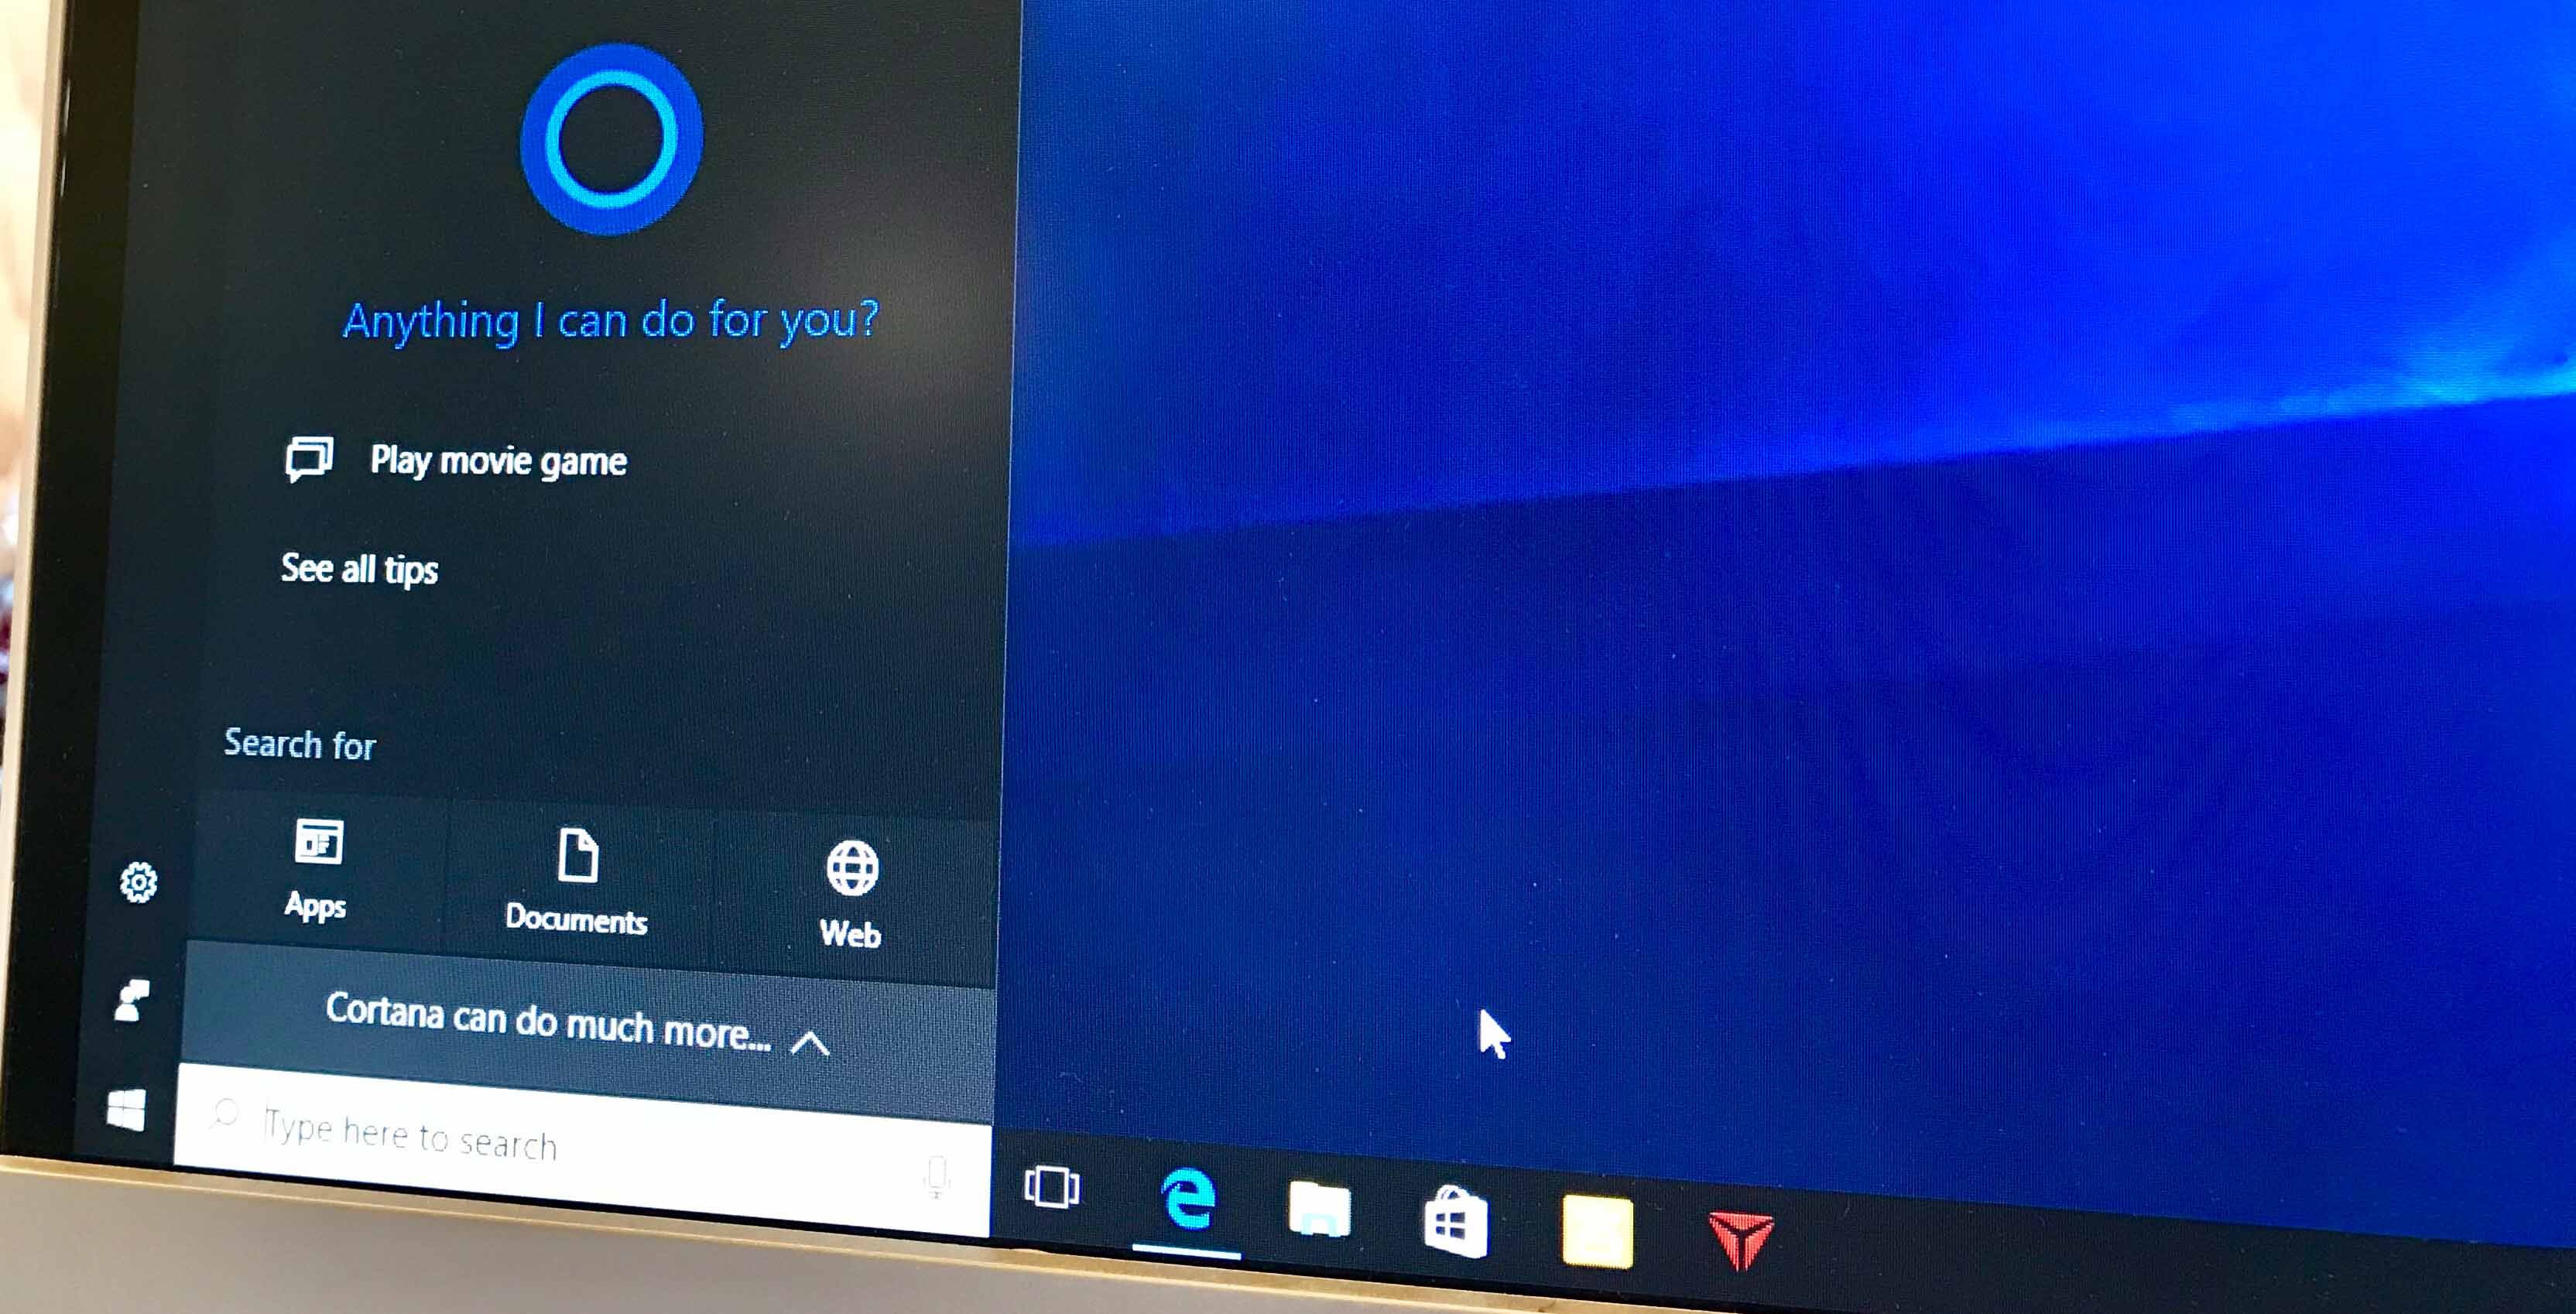 A photo showing the use of the Cortana personal assistant